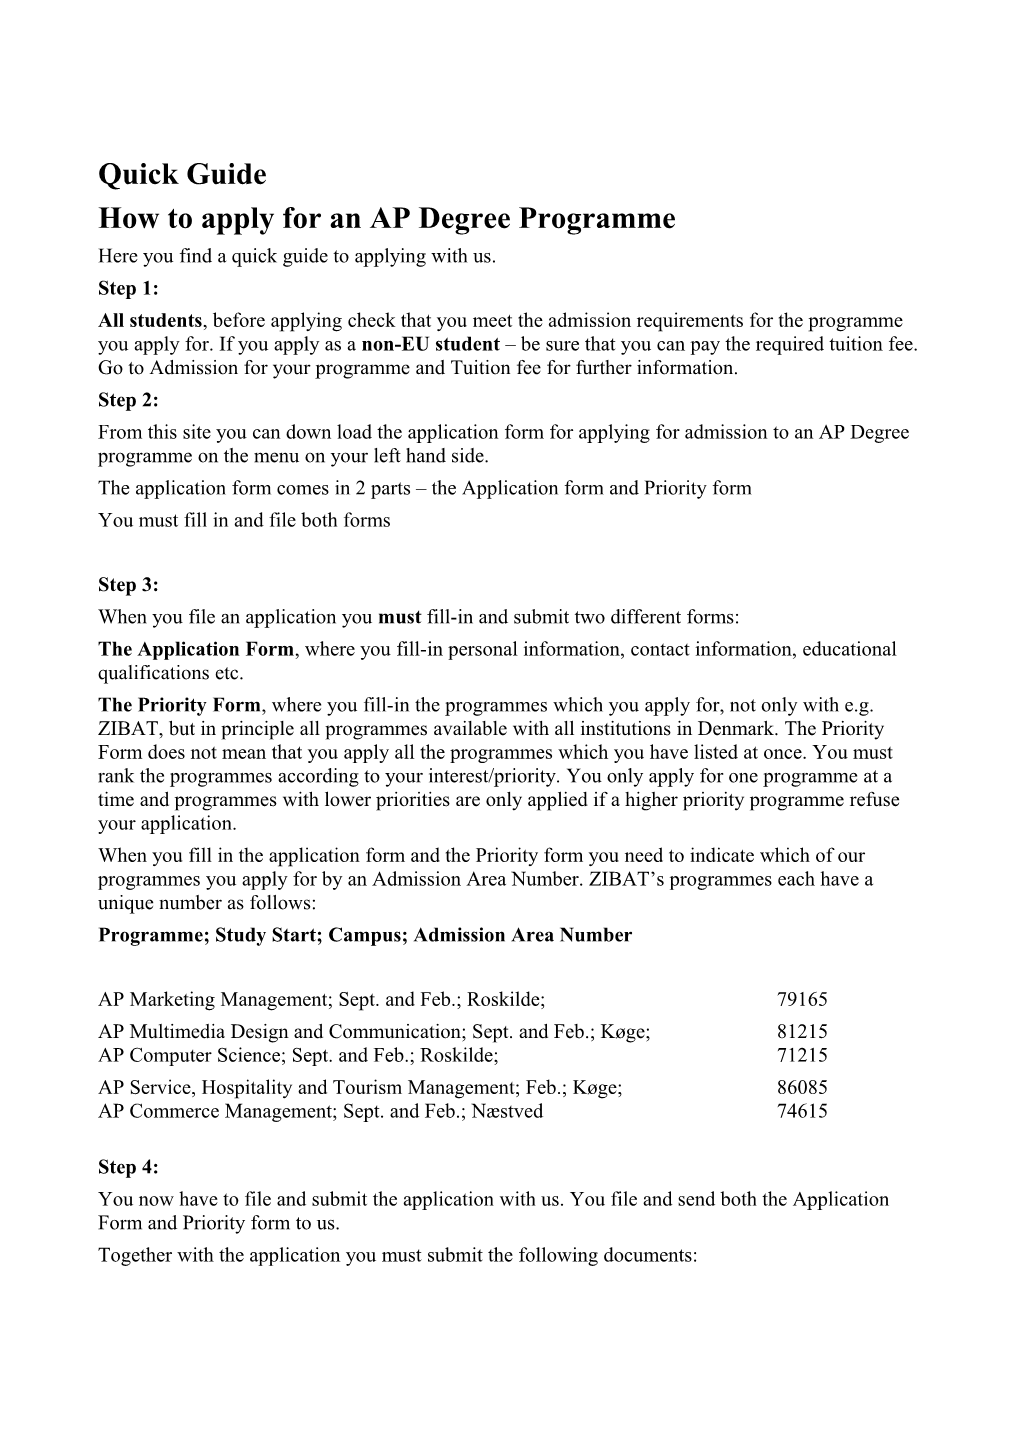 How to Apply for an AP Degree Programme